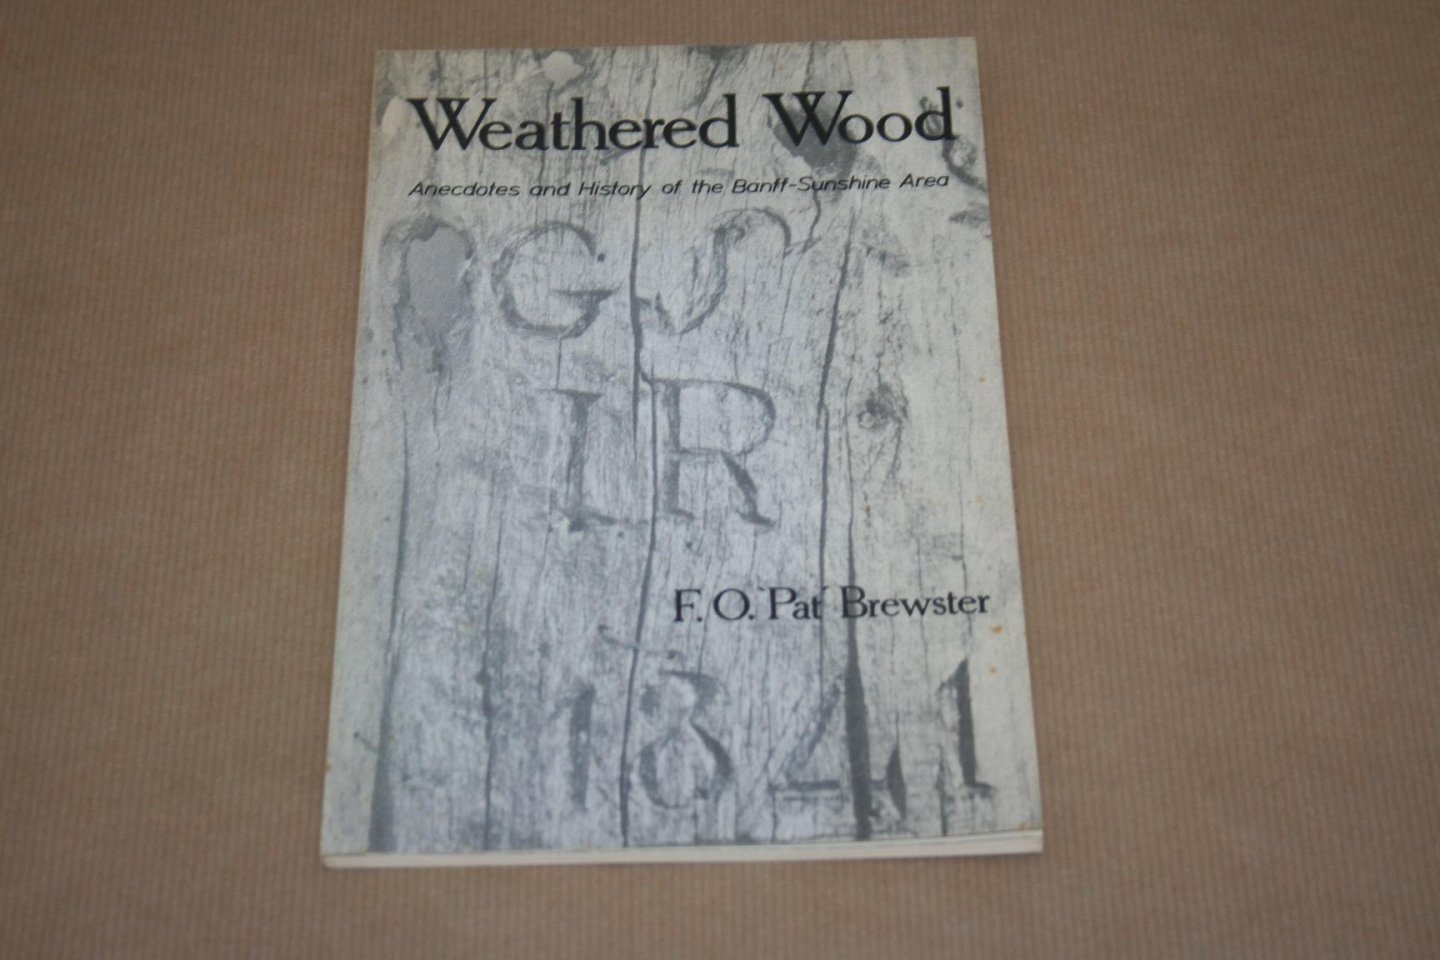 F.O. Pat Brewster - Weathered Wood Anecdotes and History of the Banff-Sunshine Area